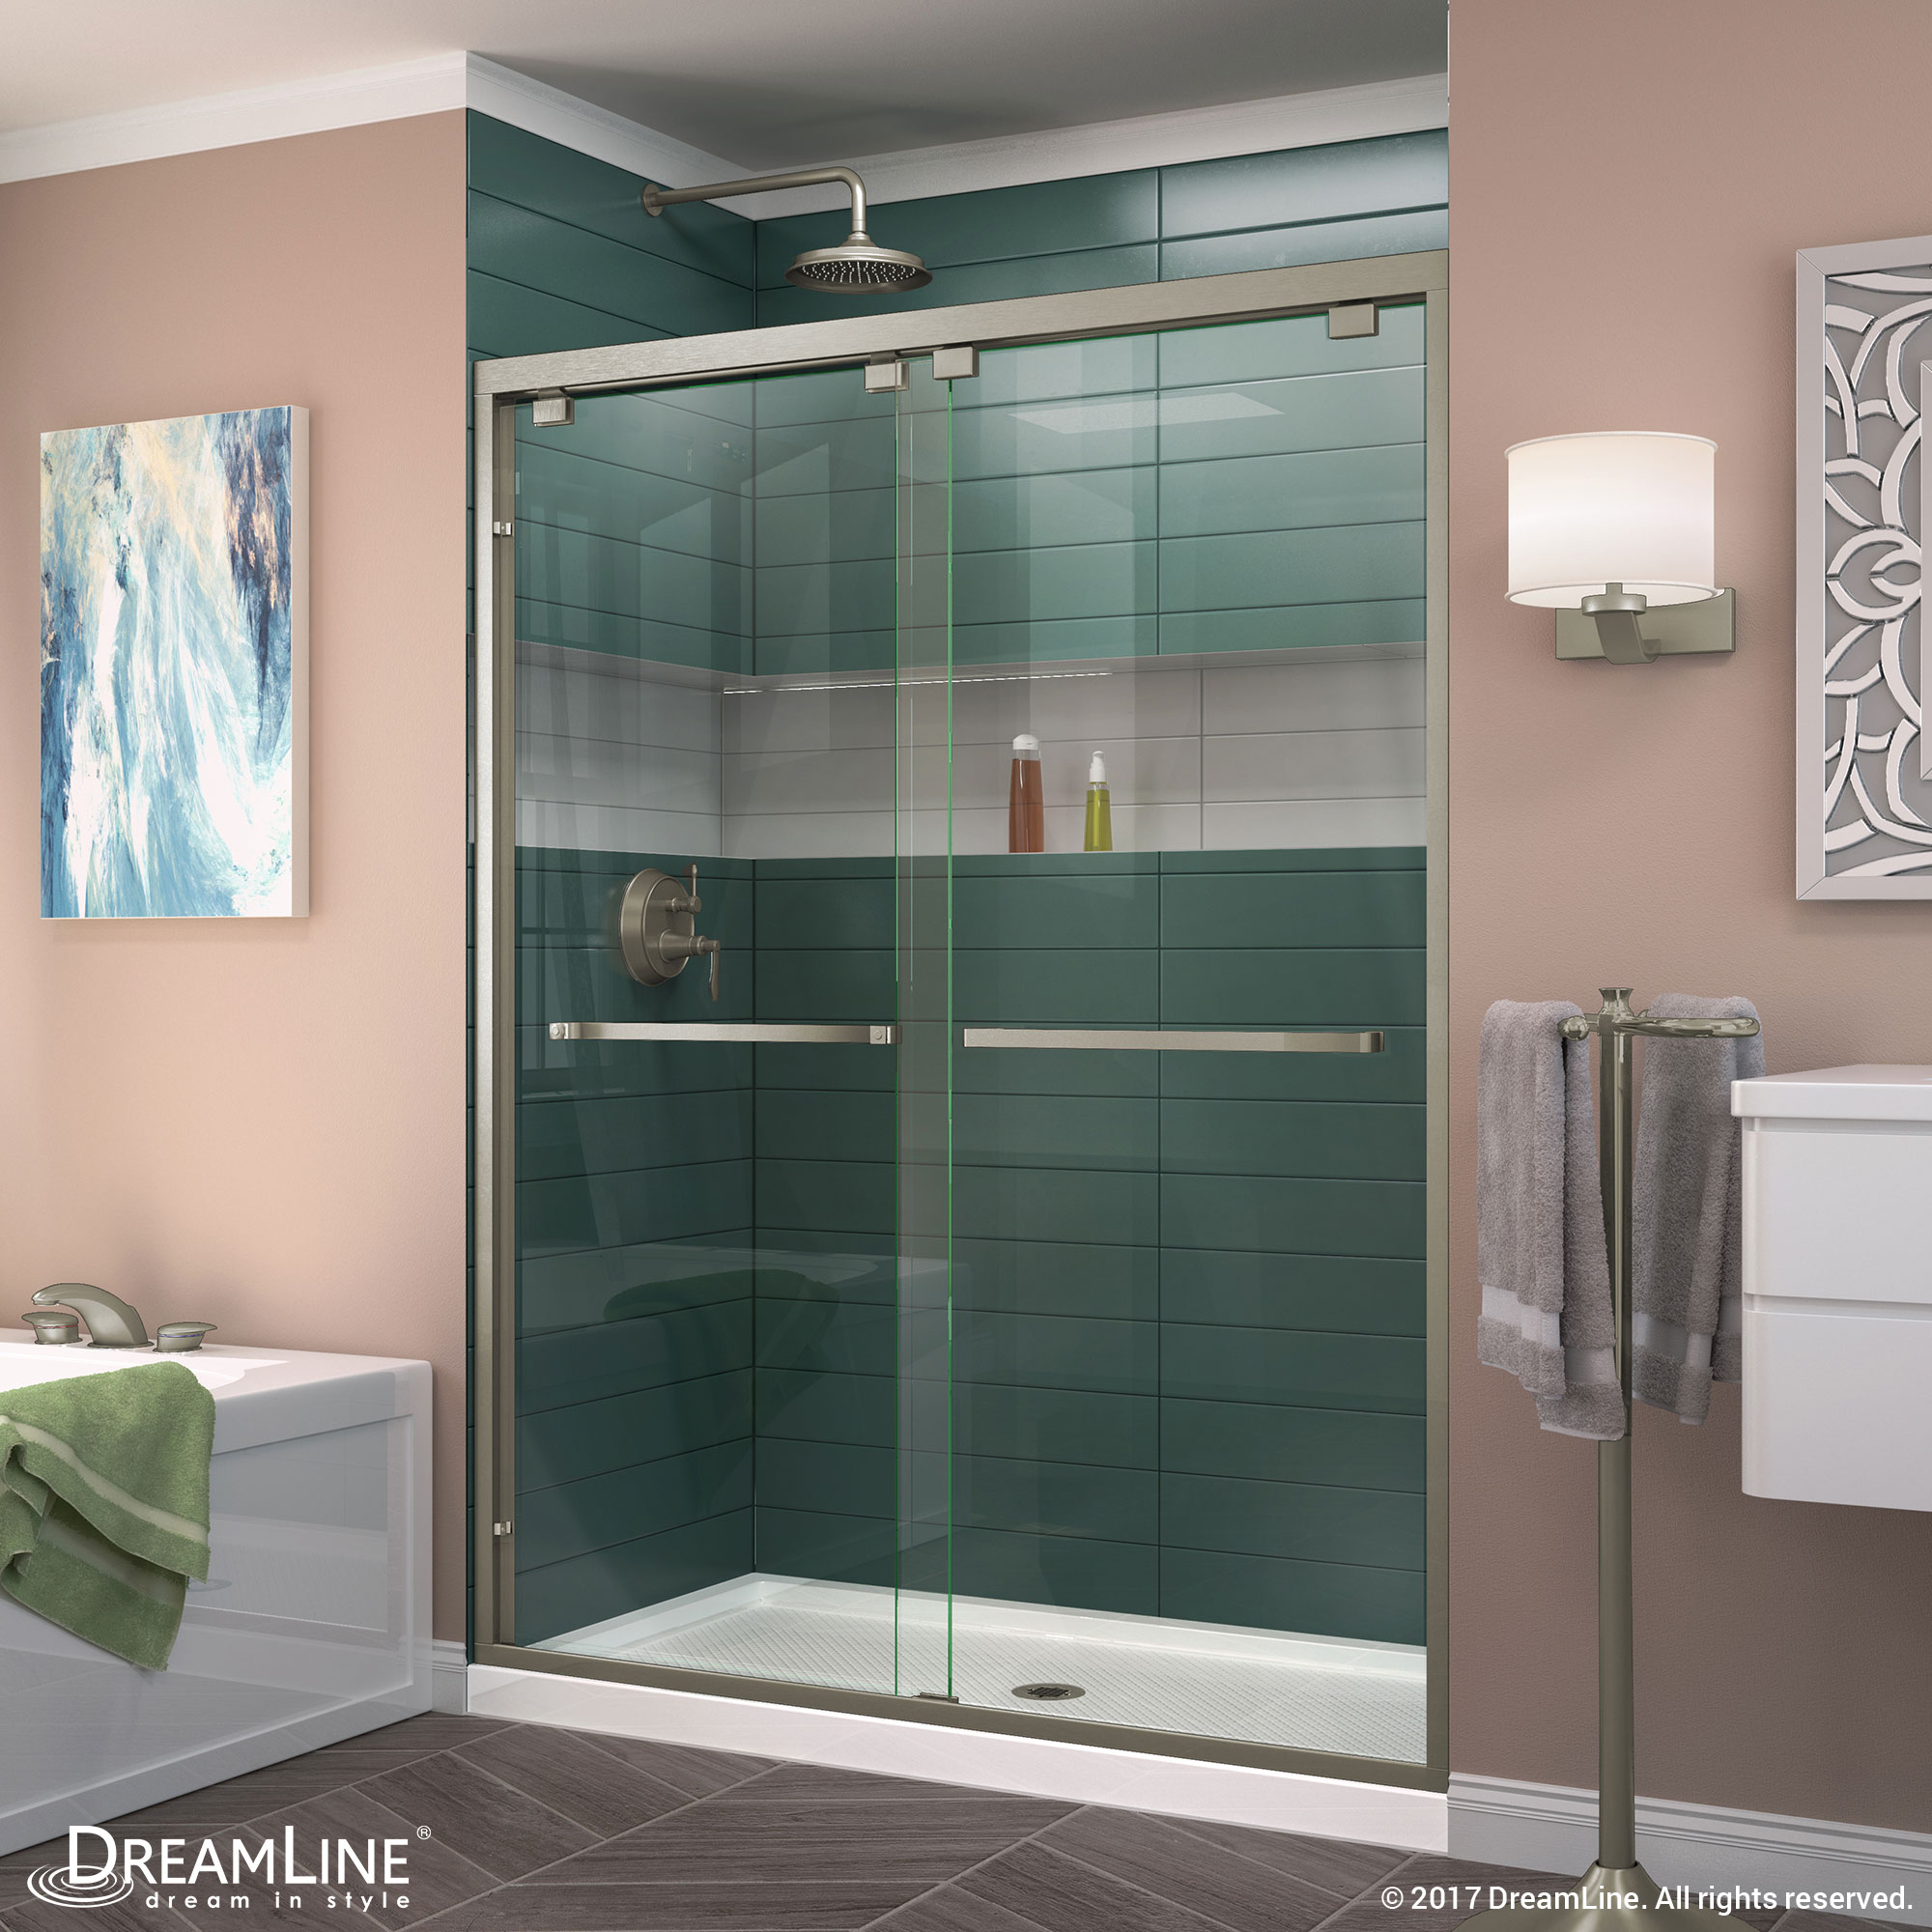 DreamLine Encore 30 in. D x 60 in. W x 78 3/4 in. H Bypass Shower Door in Chrome and Center Drain Black Base Kit